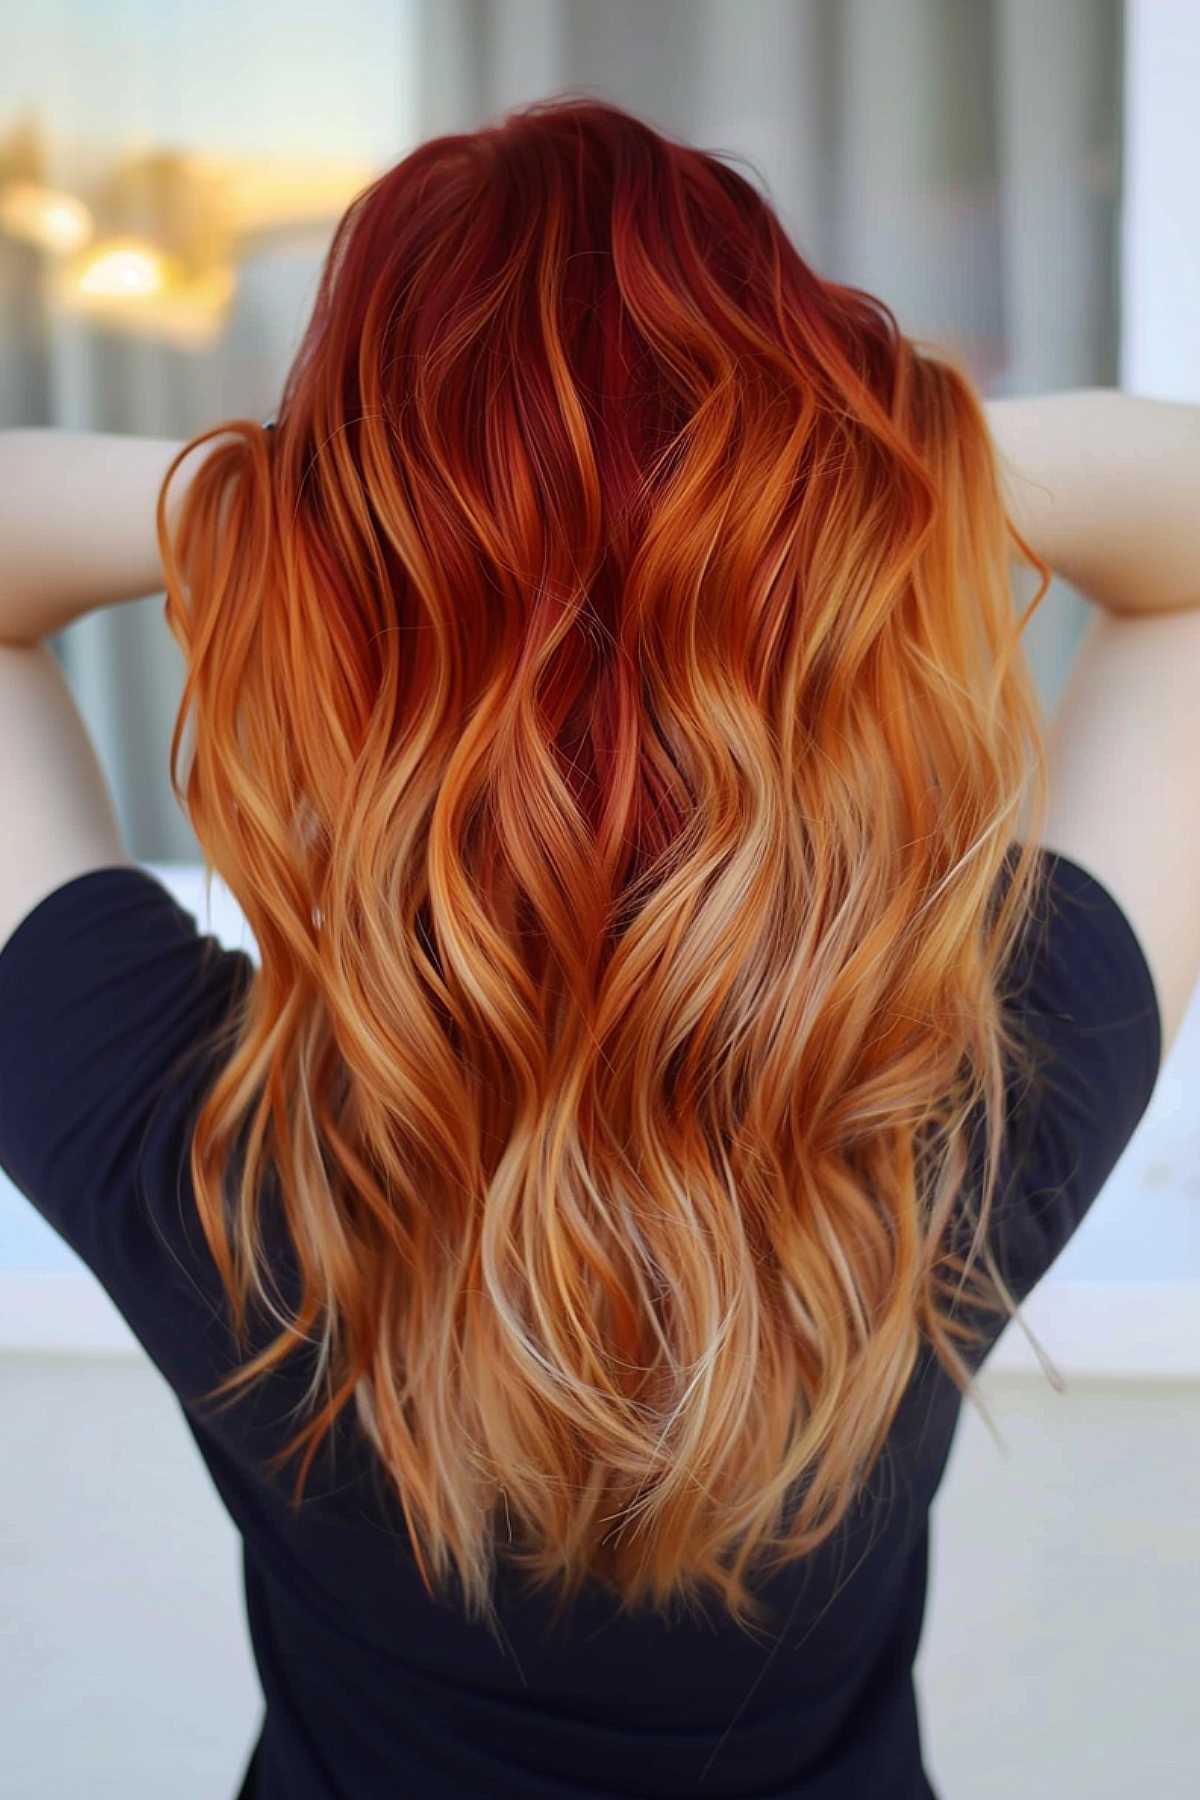 Ombre hair showing ginger top with copper blonde ends